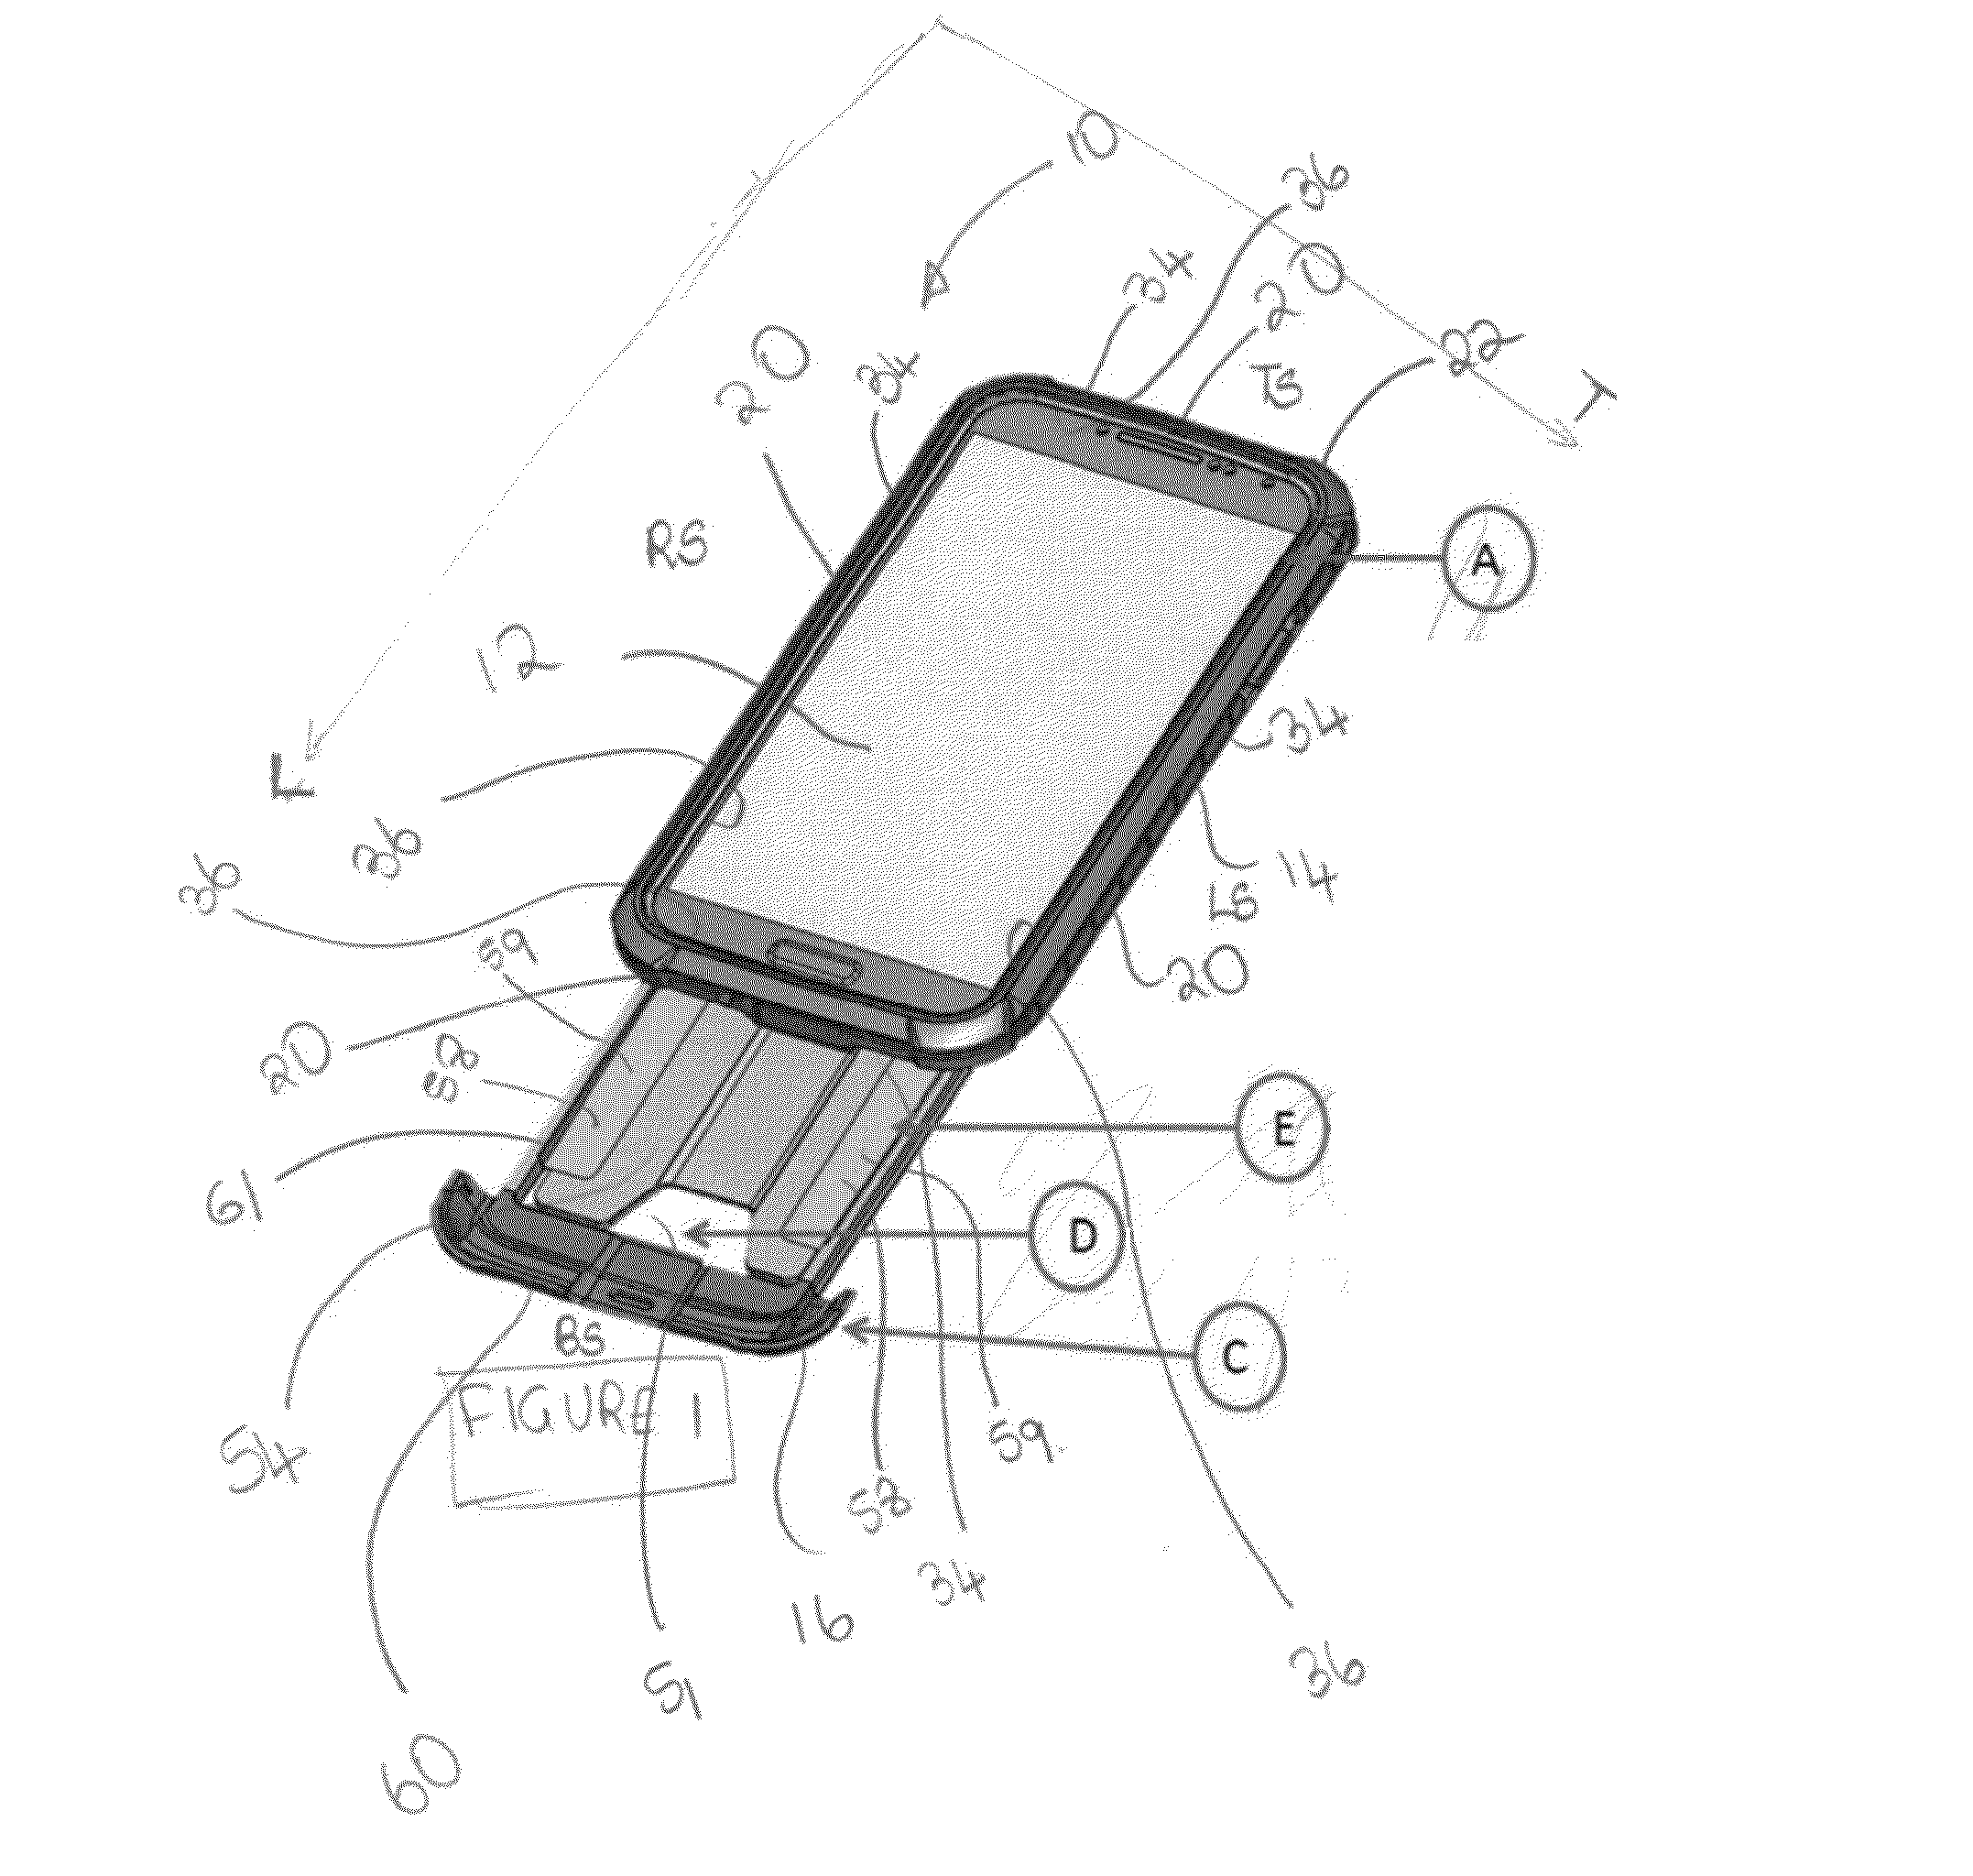 Electronic device case with a combination card and item holder